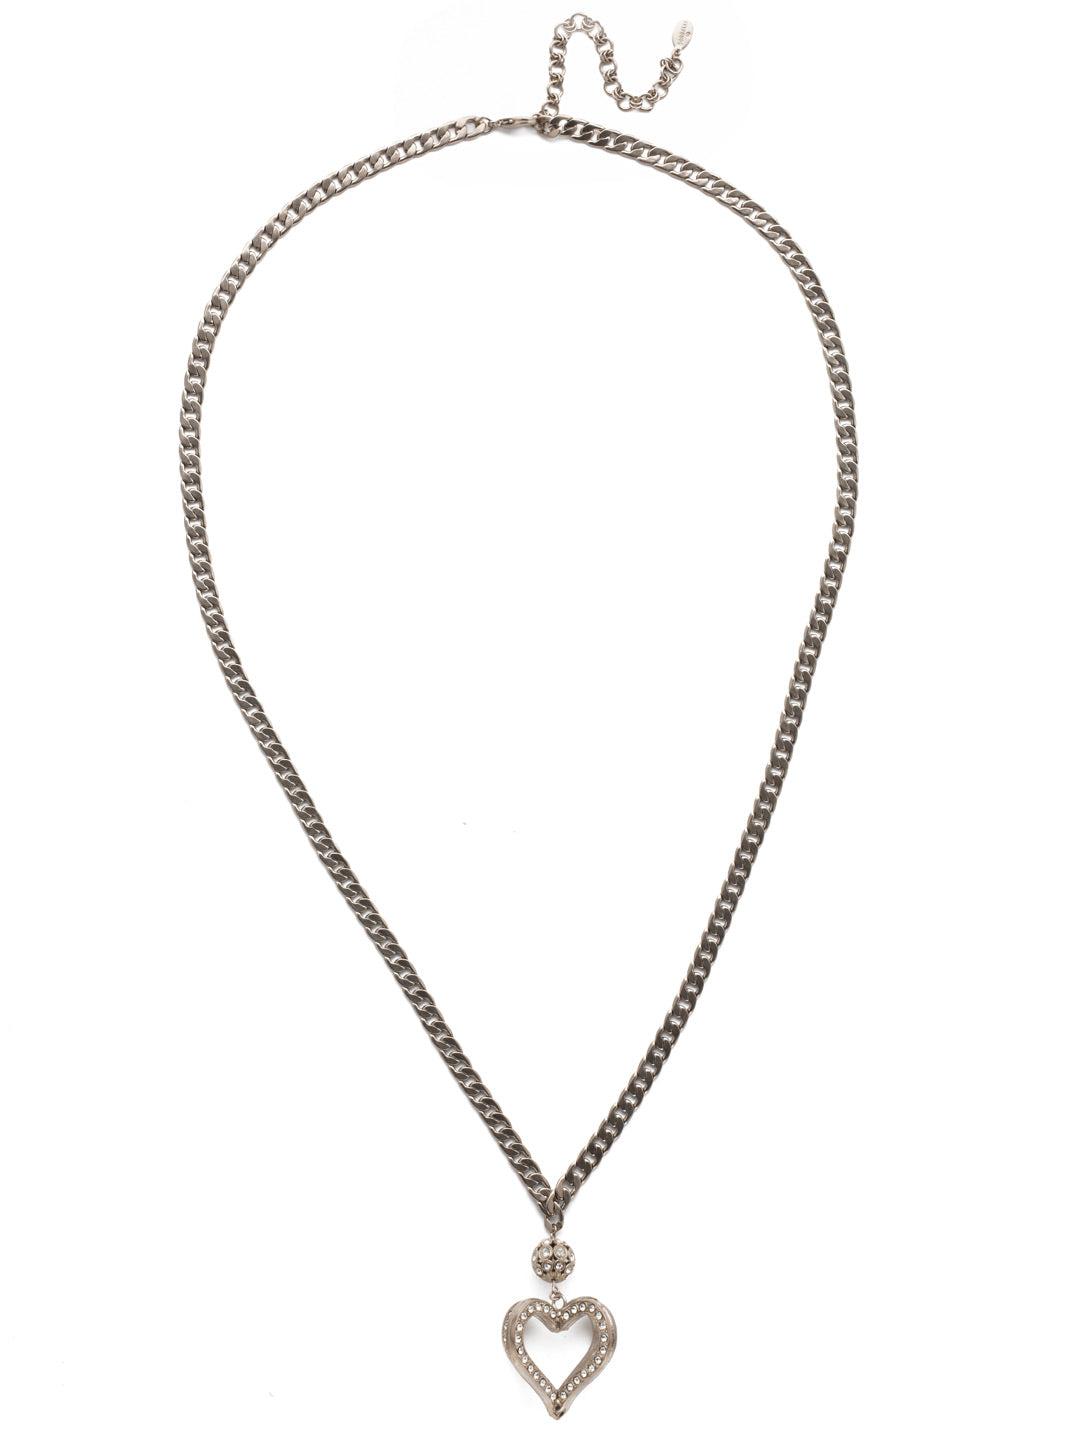 Adelynn Long Strand Necklace - NEC21ASPLP - <p>Layered to perfection! Get the look of three line necklaces in one. This long strand features a strands of darling hearts, pearls, crystals and more. Full of dainty details and sparkle galore. From Sorrelli's Polished Pearl collection in our Antique Silver-tone finish.</p>